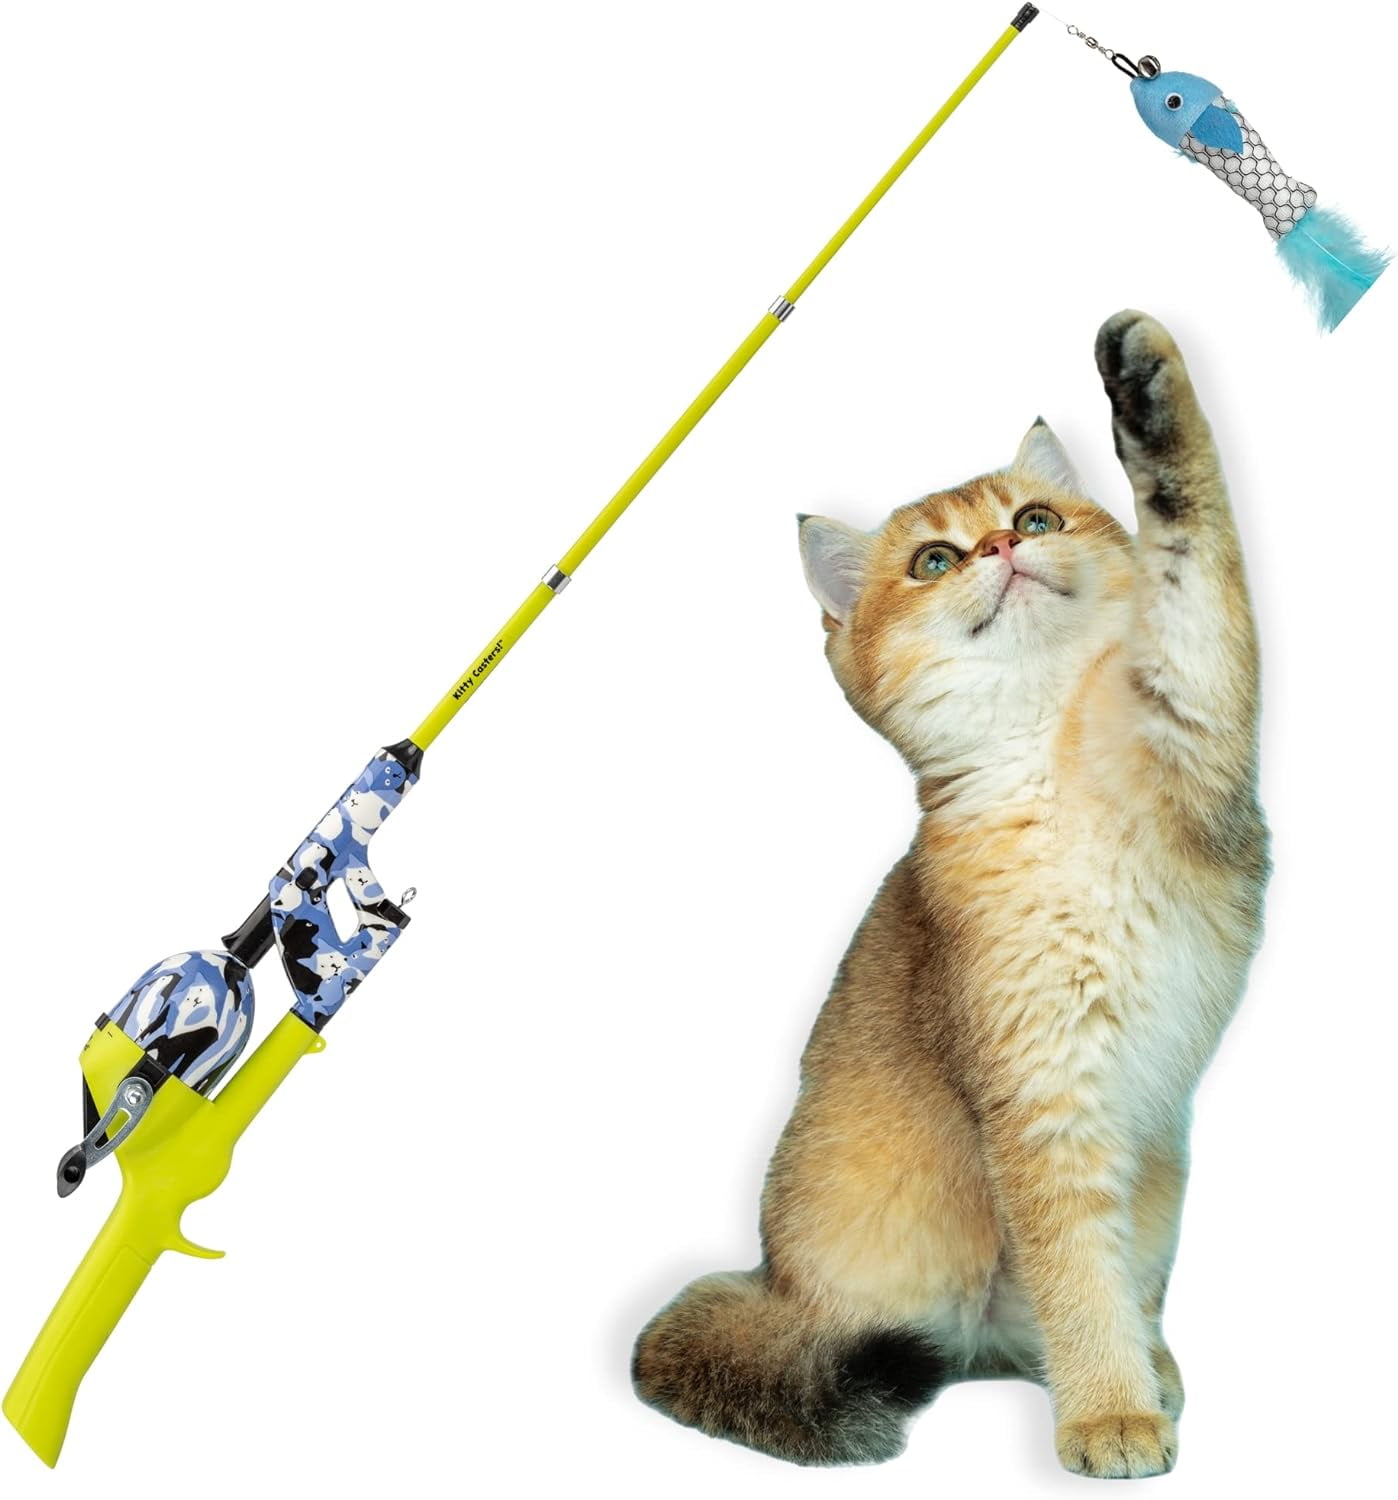 Cat Caster Fishing Pole Toy | Tangle Free, Retractable & Easy to Store. Includes Two Interchangeable Teaser Toys | The Ultimate Gift for Kitty Lovers